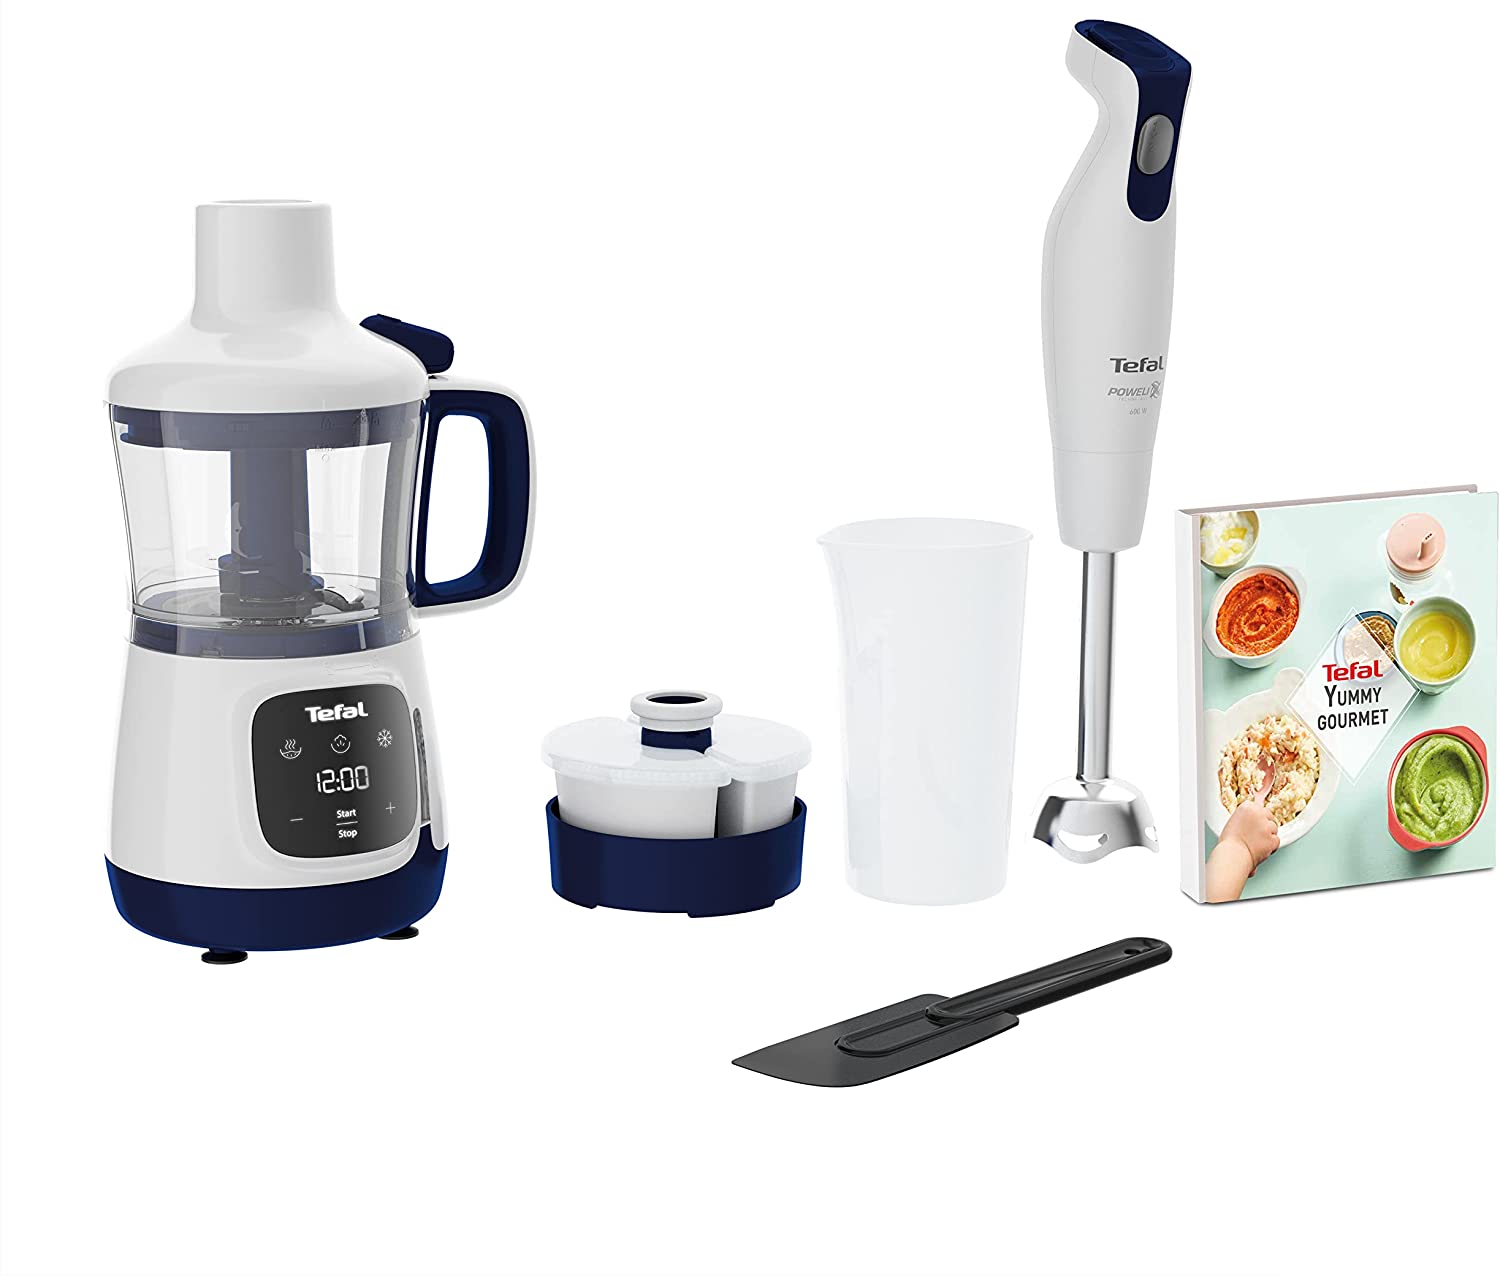 Tefal HB55W4 Yummy Gourmet Baby Food Preparer | Includes Hand Blender, Spatula, Measuring Cup, 2x Ceramic Storage Containers, Recipe Book | Touchscreen | BPA Free | Dishwasher Safe Accessories | White/Blue